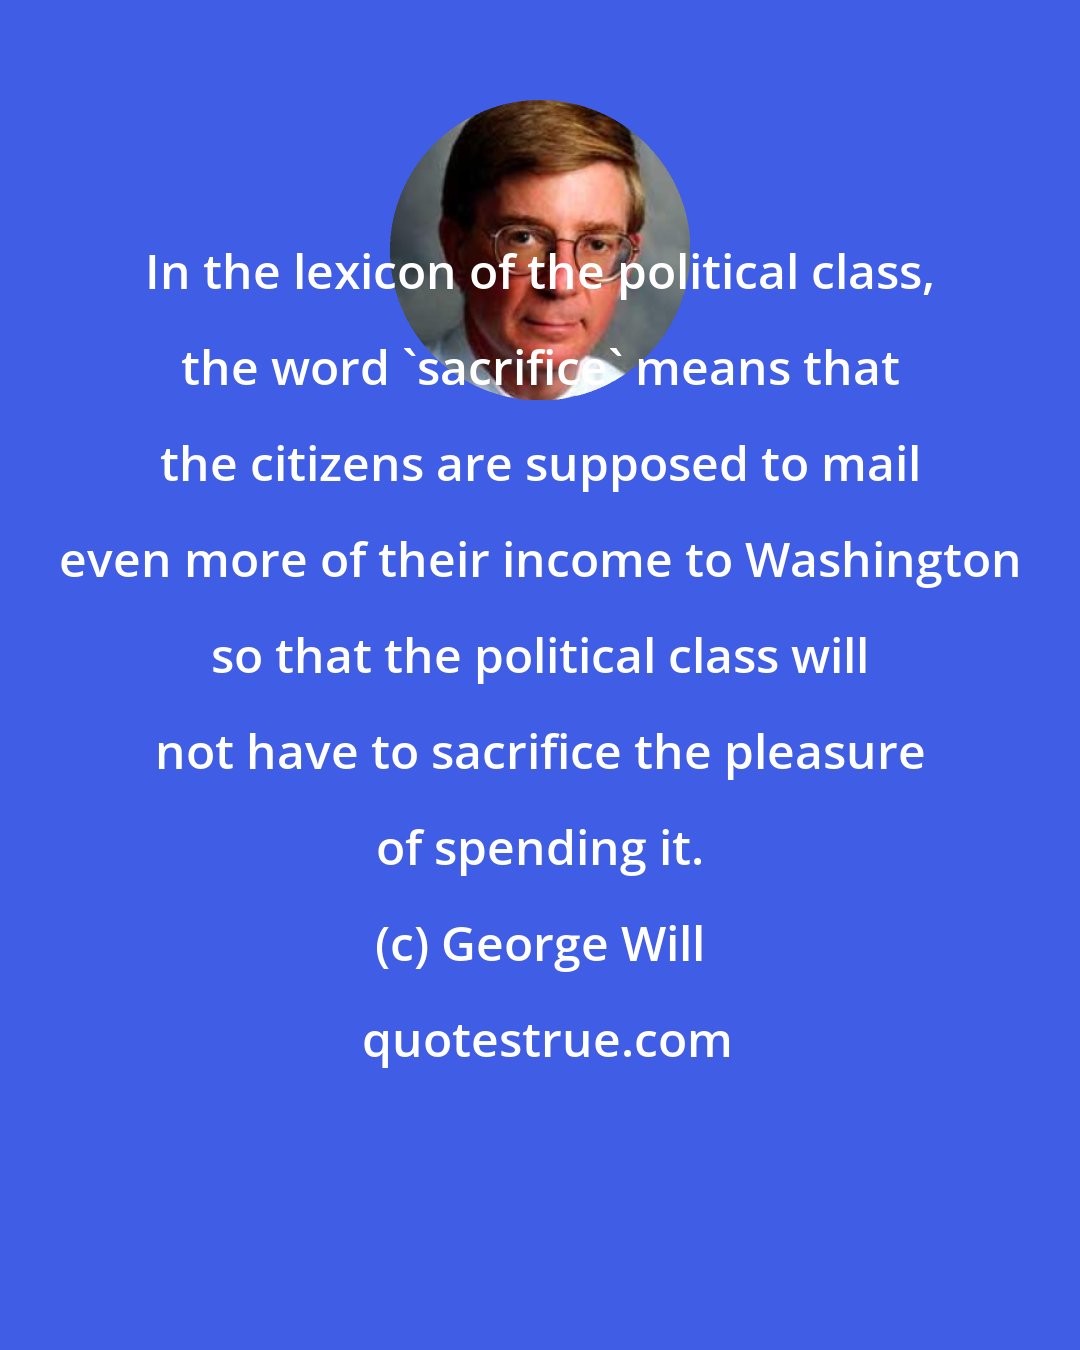 George Will: In the lexicon of the political class, the word 'sacrifice' means that the citizens are supposed to mail even more of their income to Washington so that the political class will not have to sacrifice the pleasure of spending it.